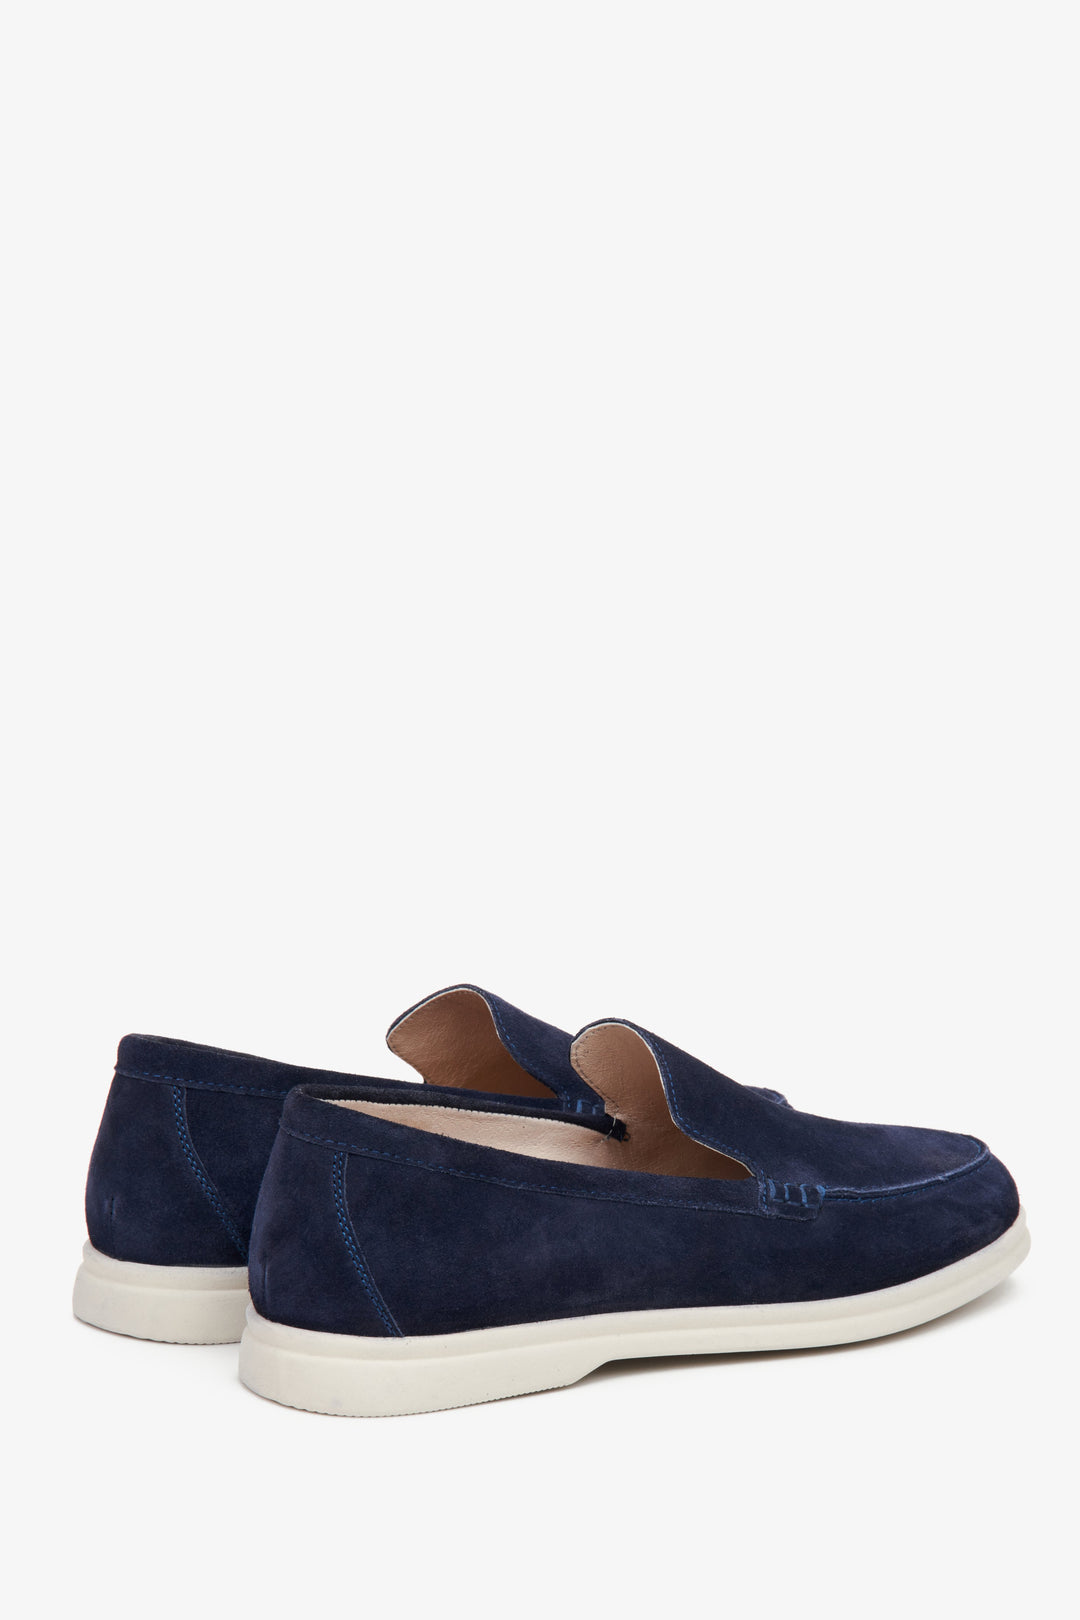 Estro men's natural velvet moccasins in navy blue - close-up of the heel and sideline of the shoes.